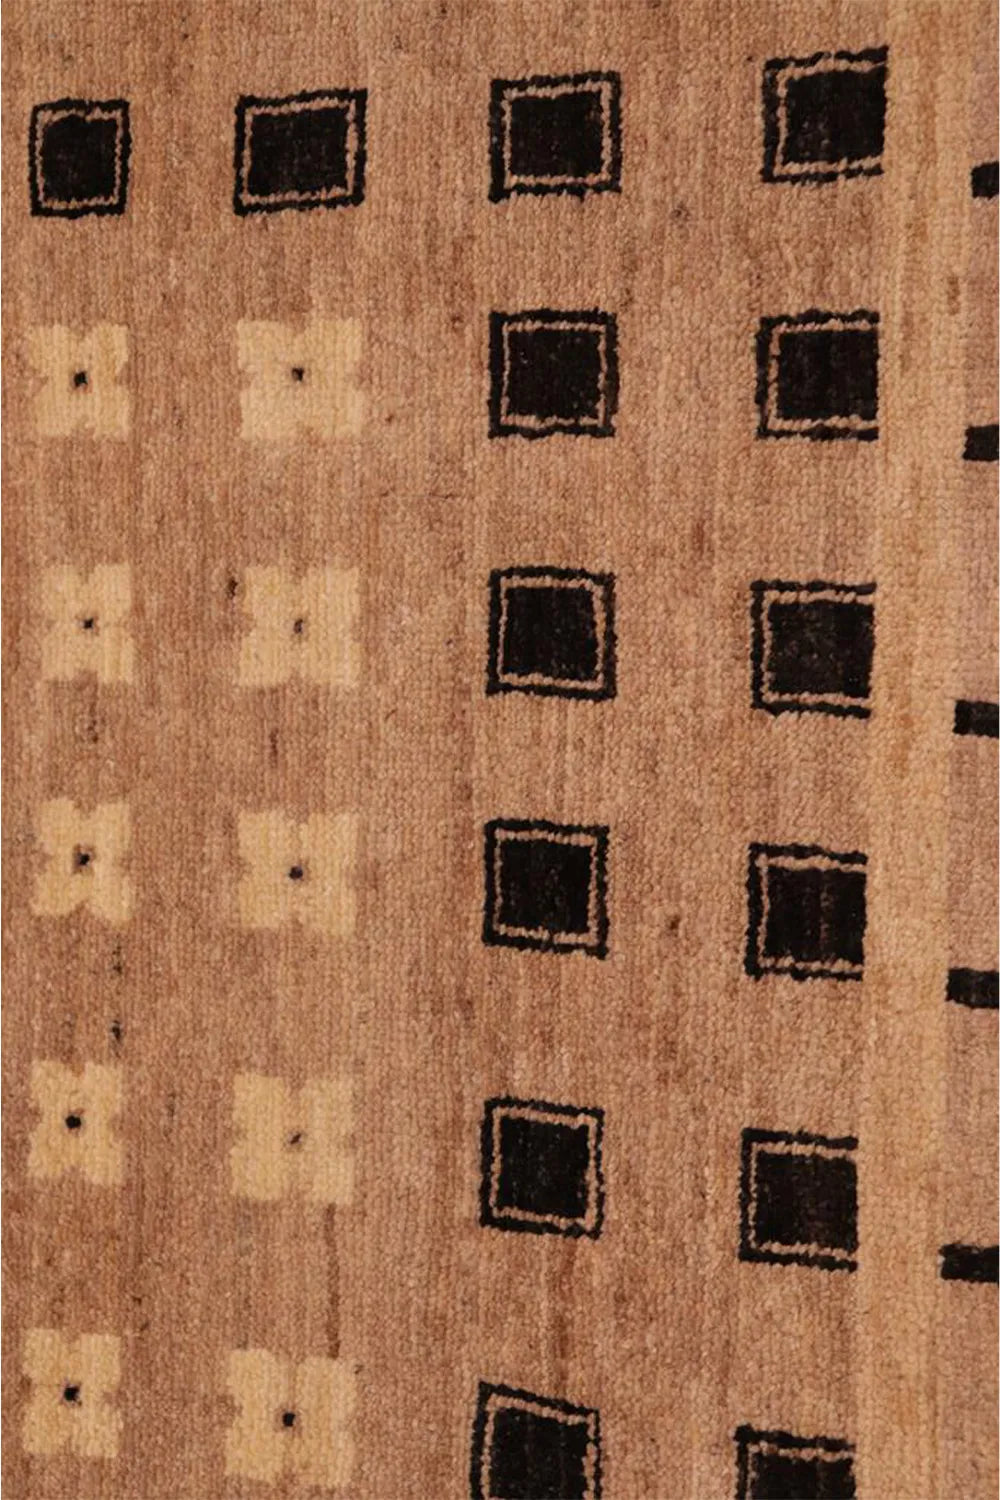 Persian-influenced mid-century modern rug, a statement of handcrafted beauty.